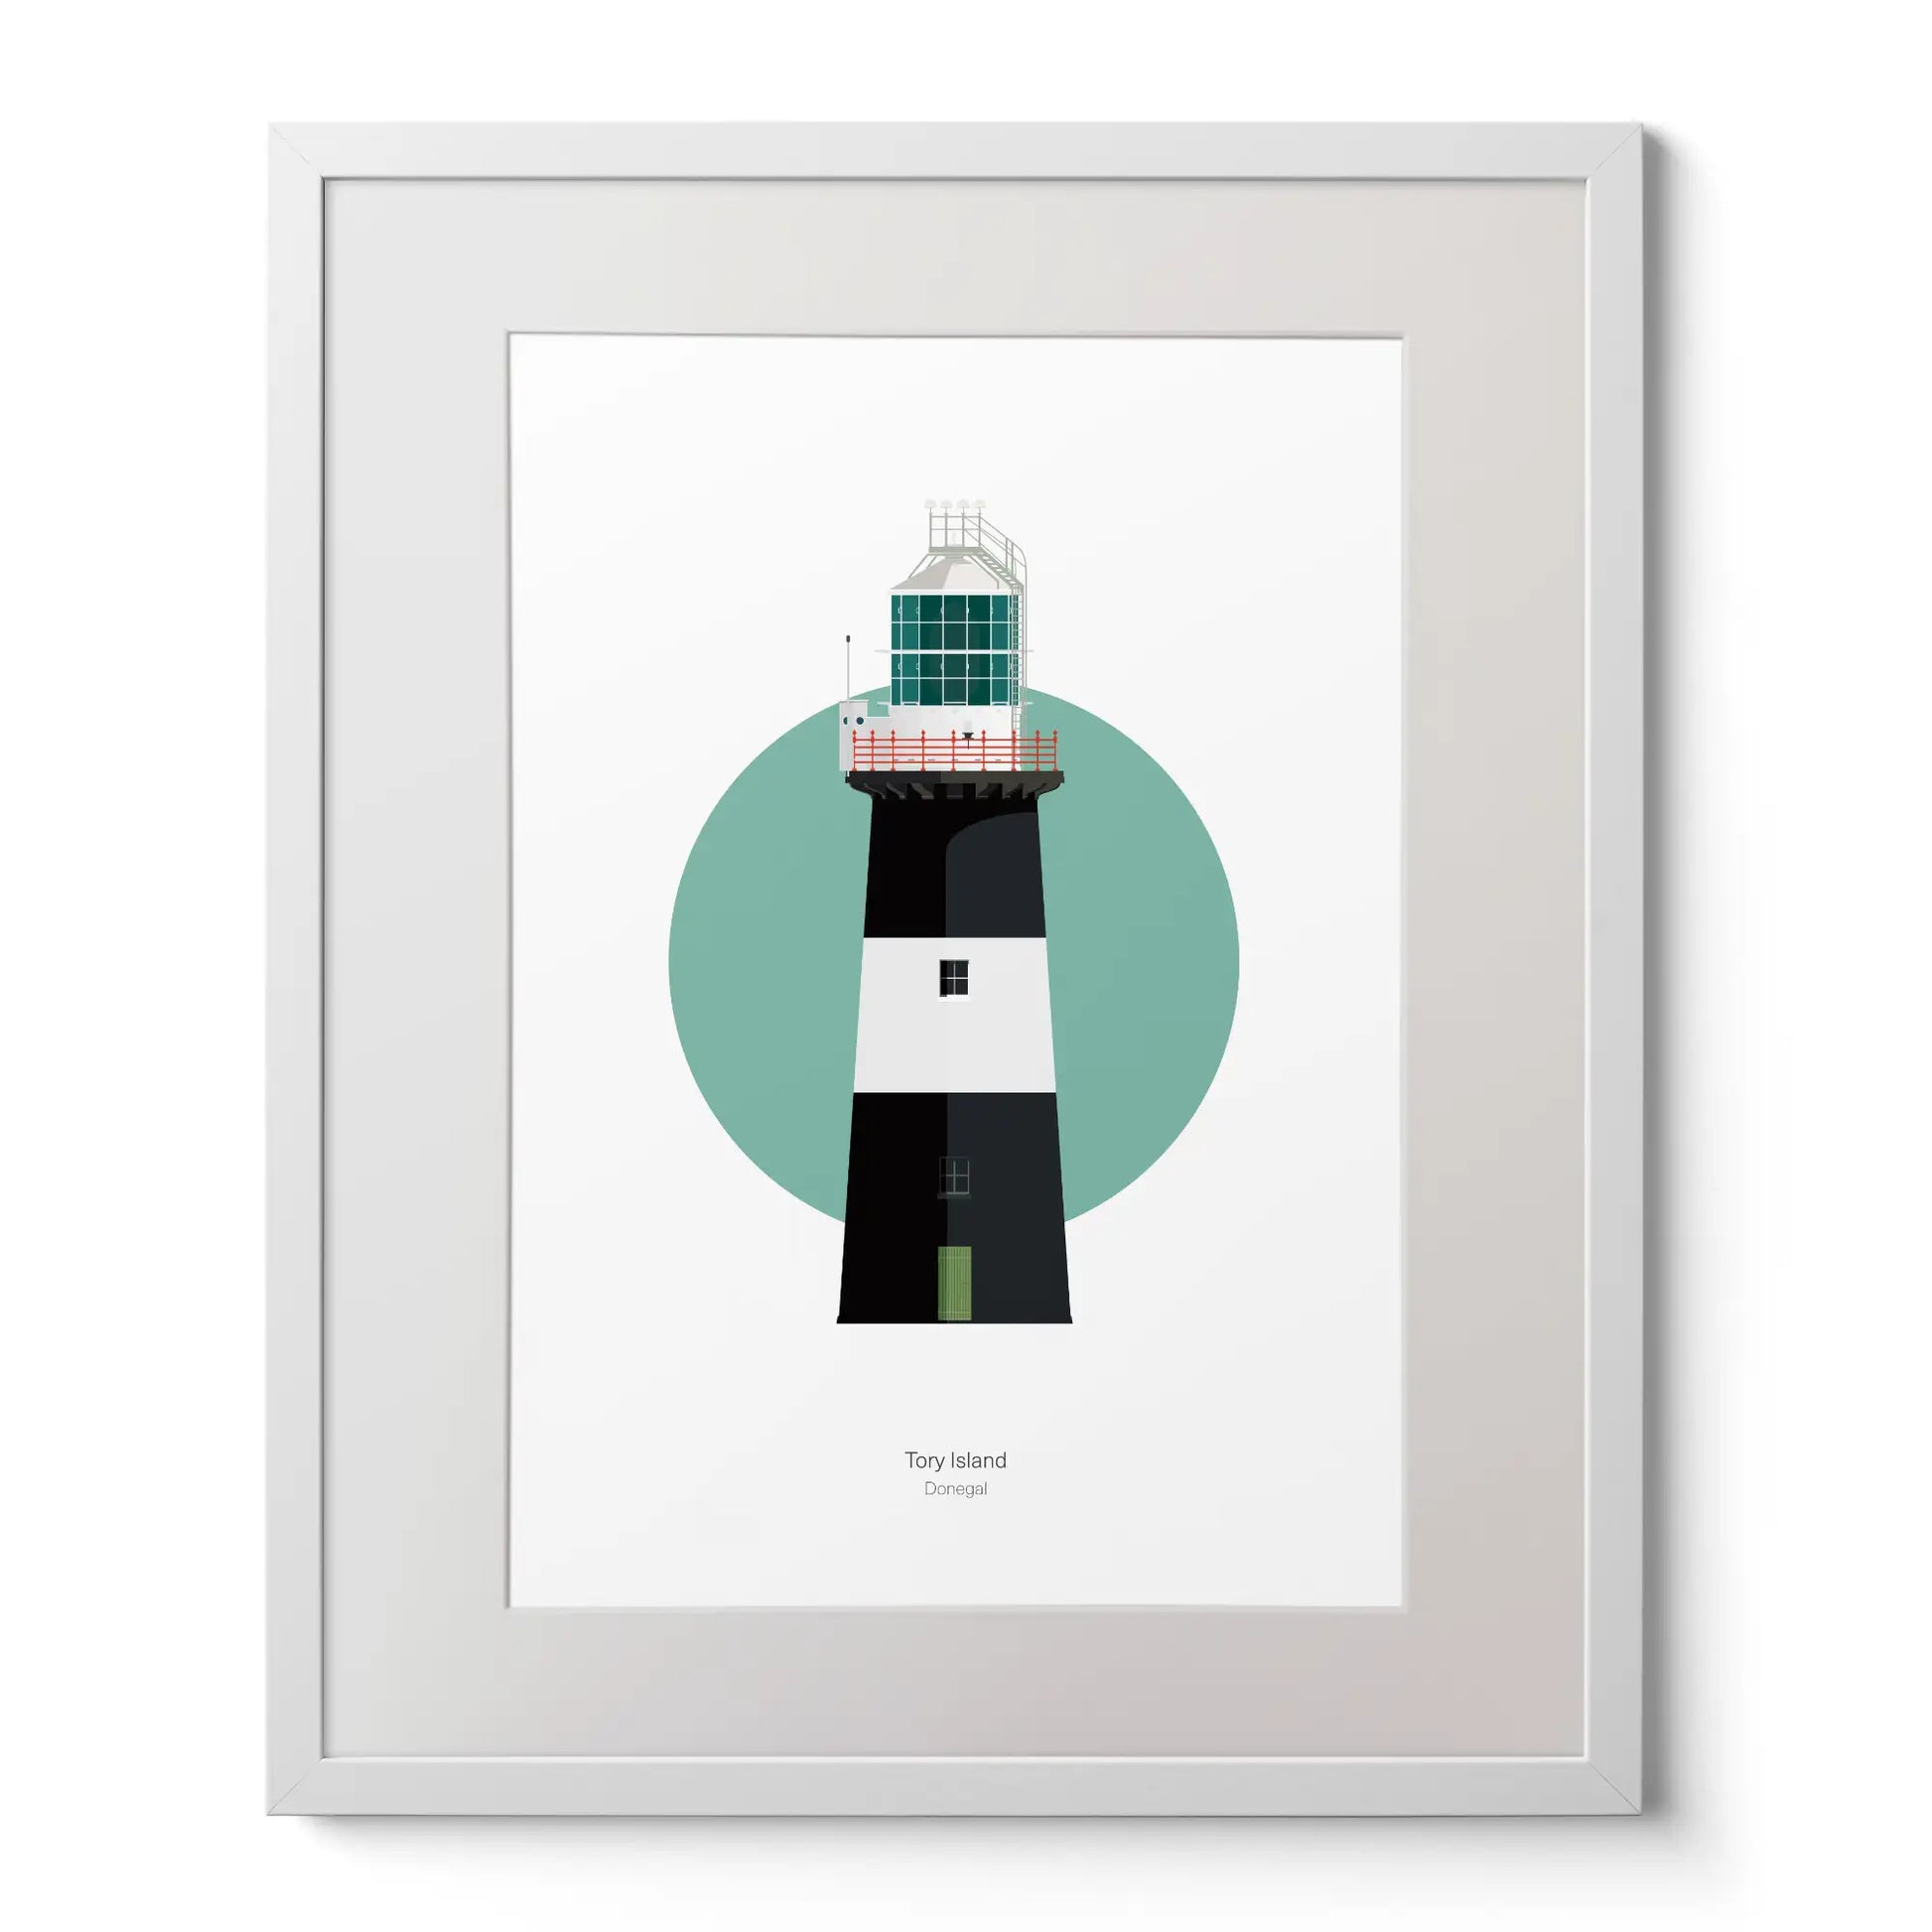 Illustration of Tory Island lighthouse on a white background inside light blue square, mounted and measuring 40x50cm.